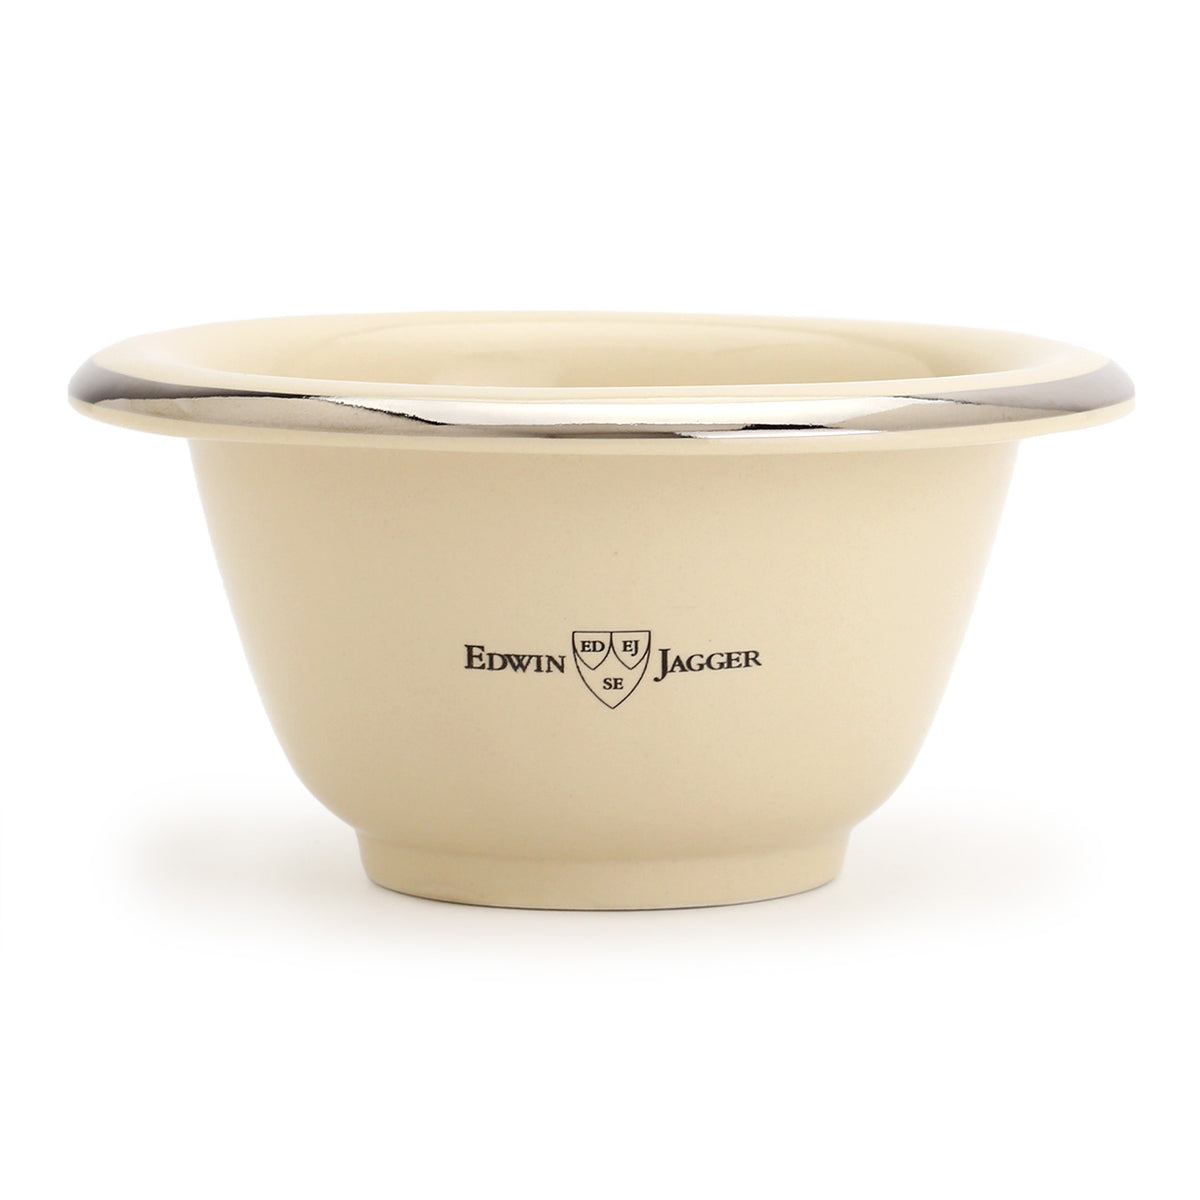 Edwin Jagger Ivory Lather Bowl - side view